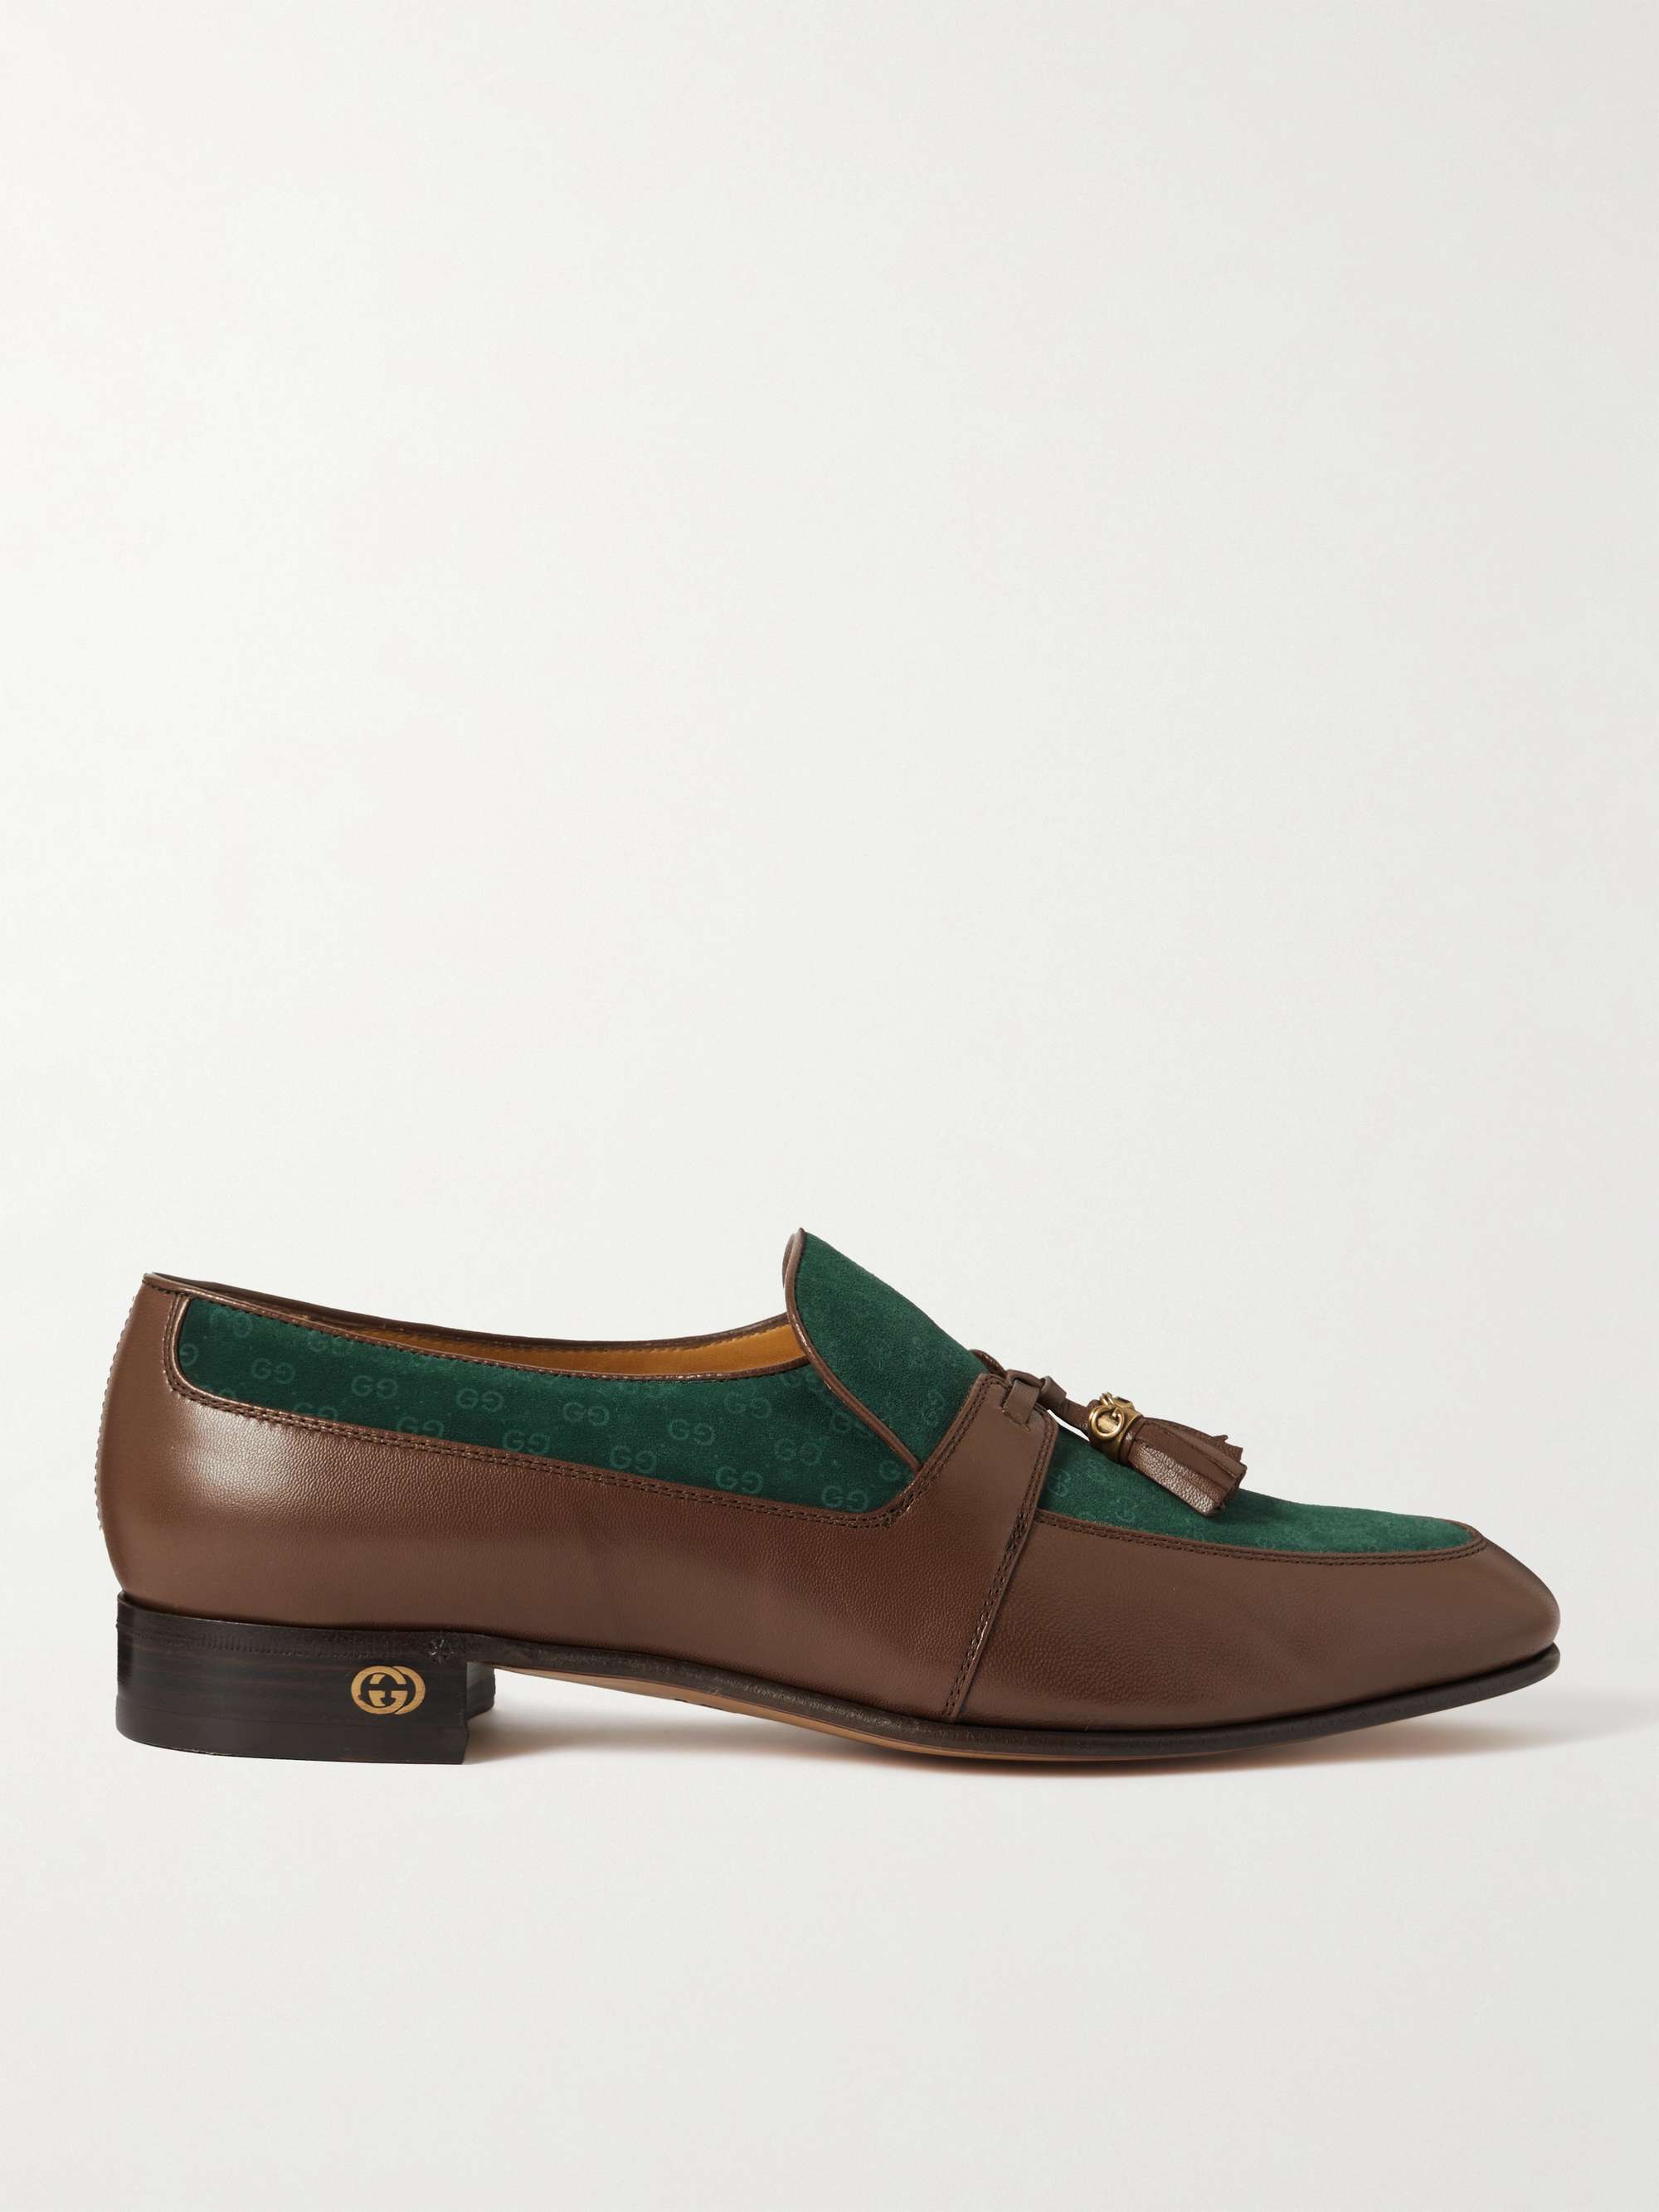 GUCCI Tasseled Leather and Suede Loafers | MR PORTER